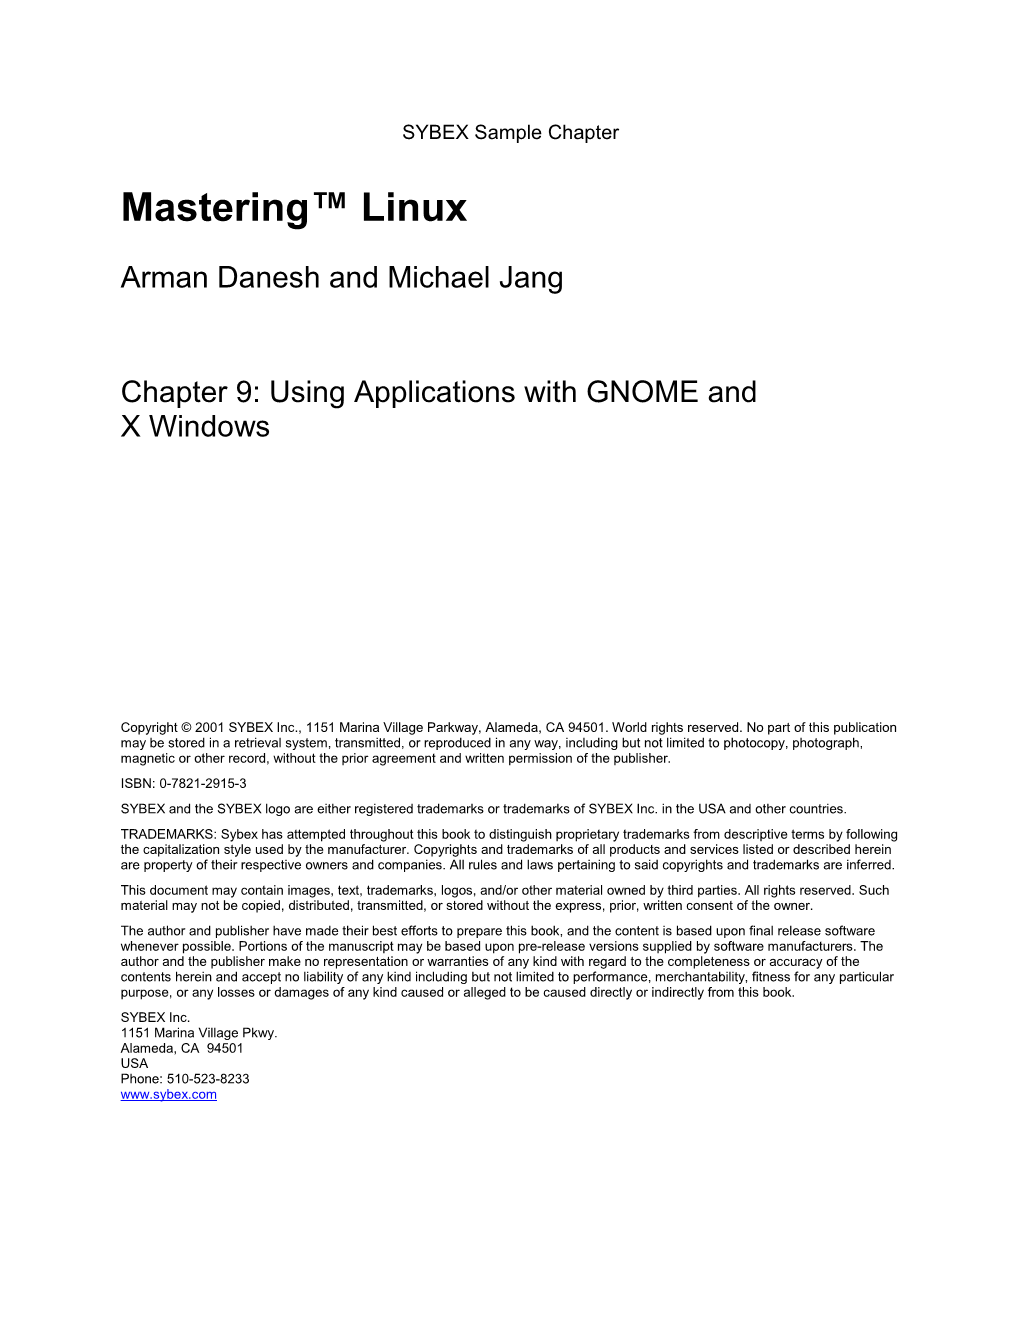 Mastering™ Linux